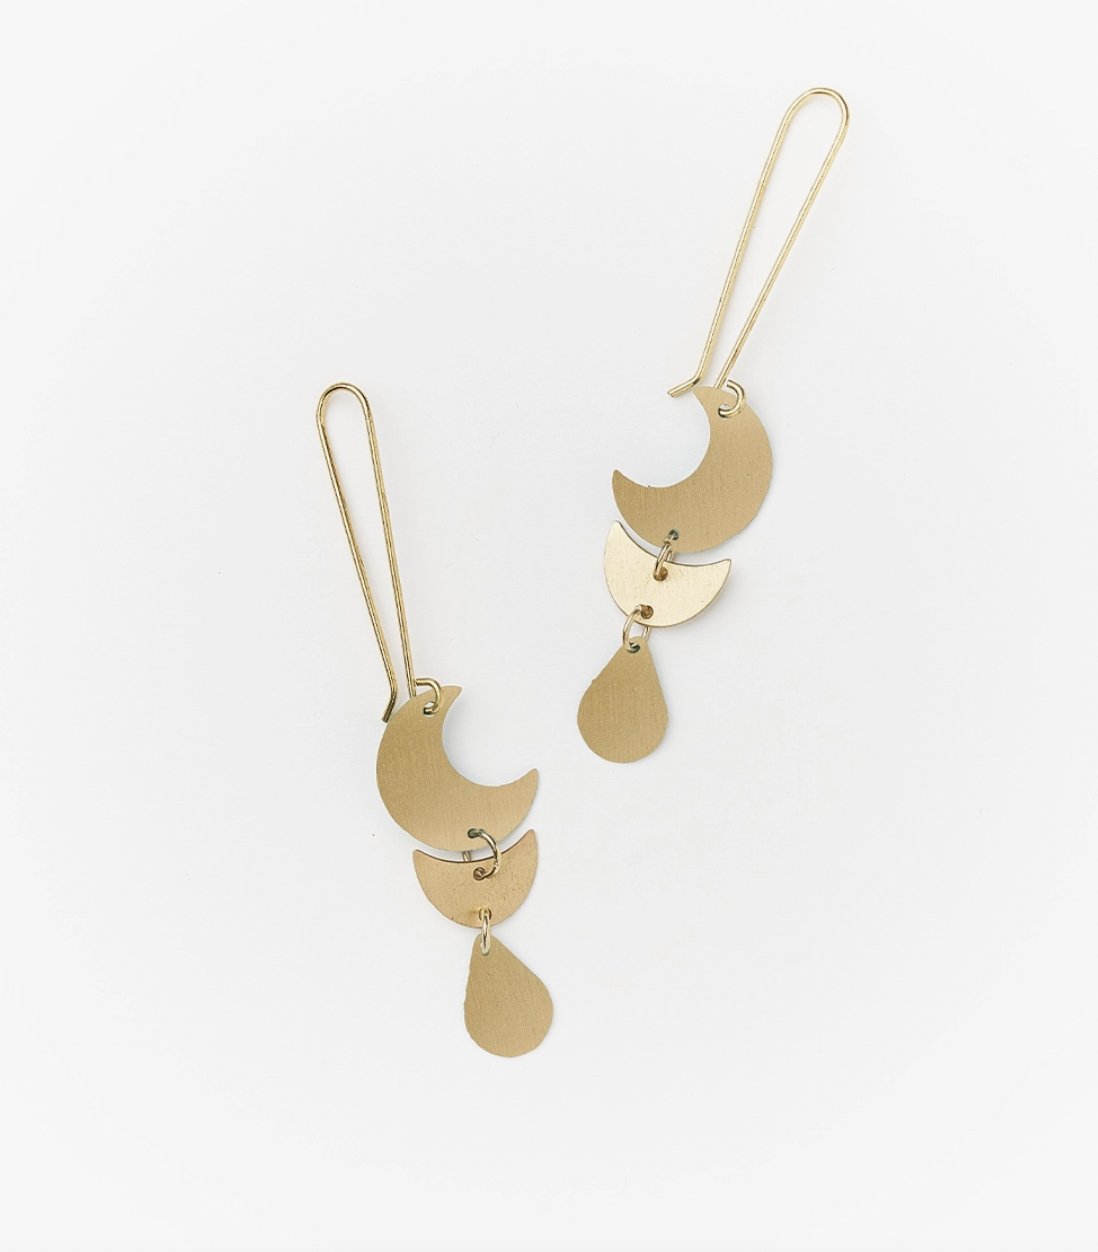 Rajani Moon Phase Gold Drop Earrings: handcrafted drop earrings feature dual crescent moon and teardrop charms with gold finish